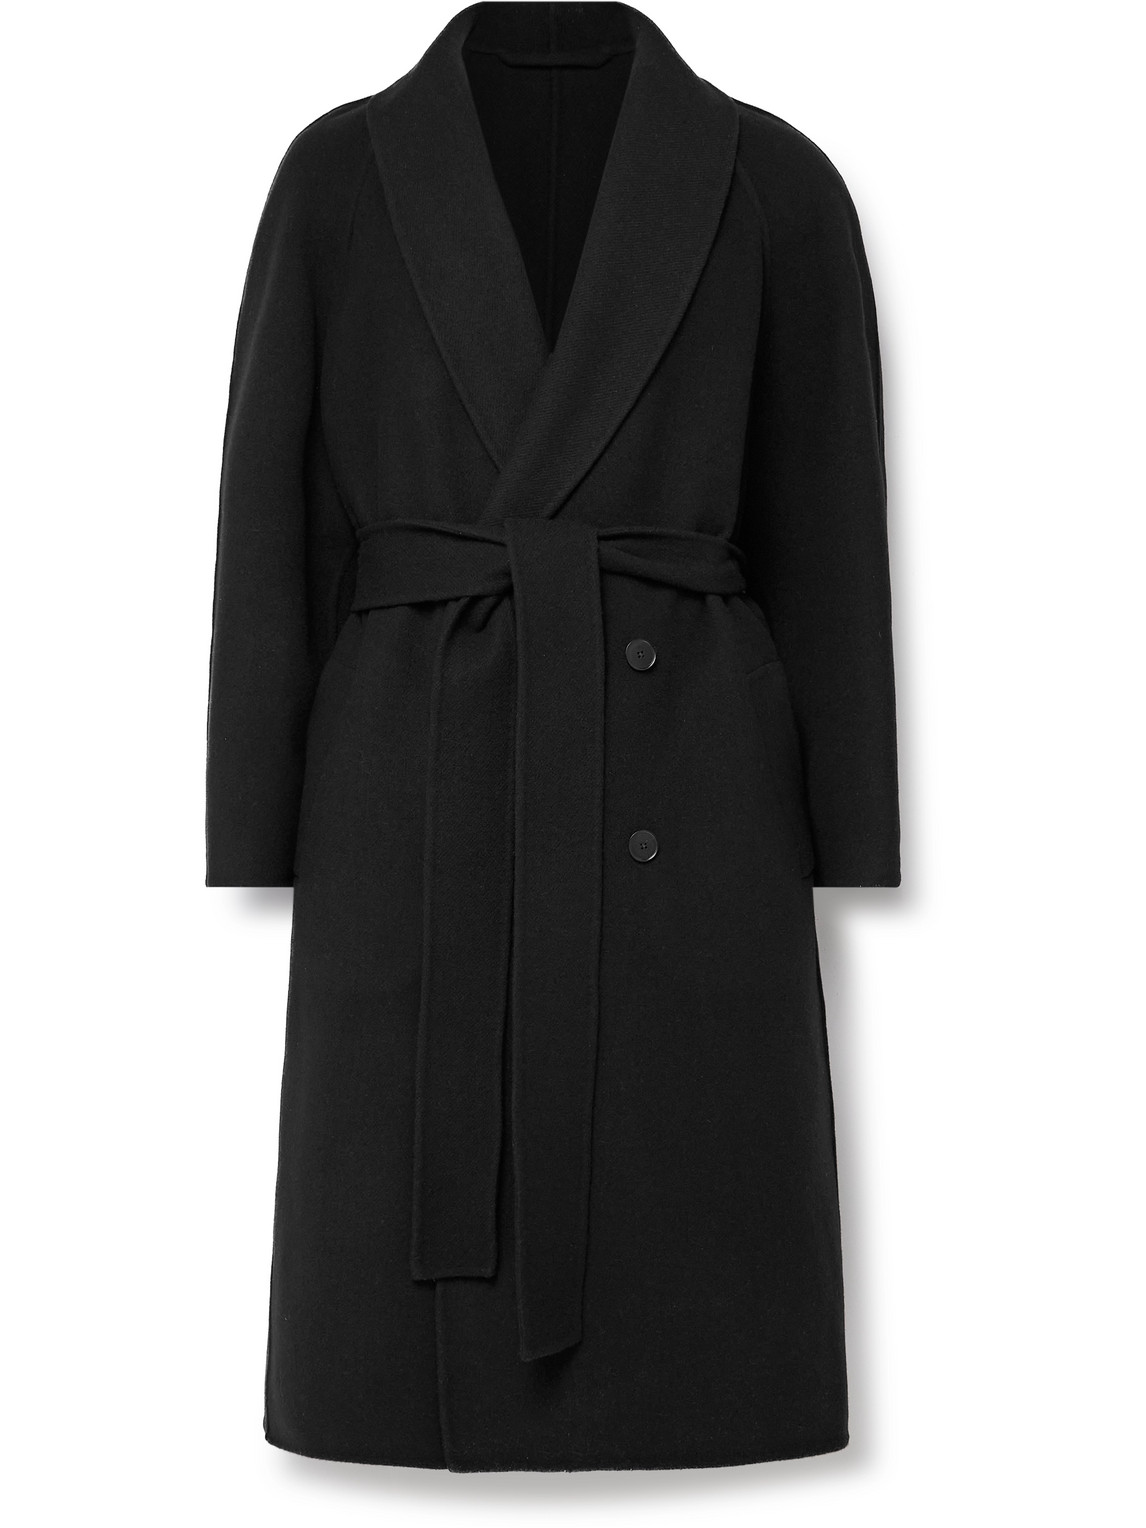 Ferro Belted Double-Breasted Wool-Blend Coat